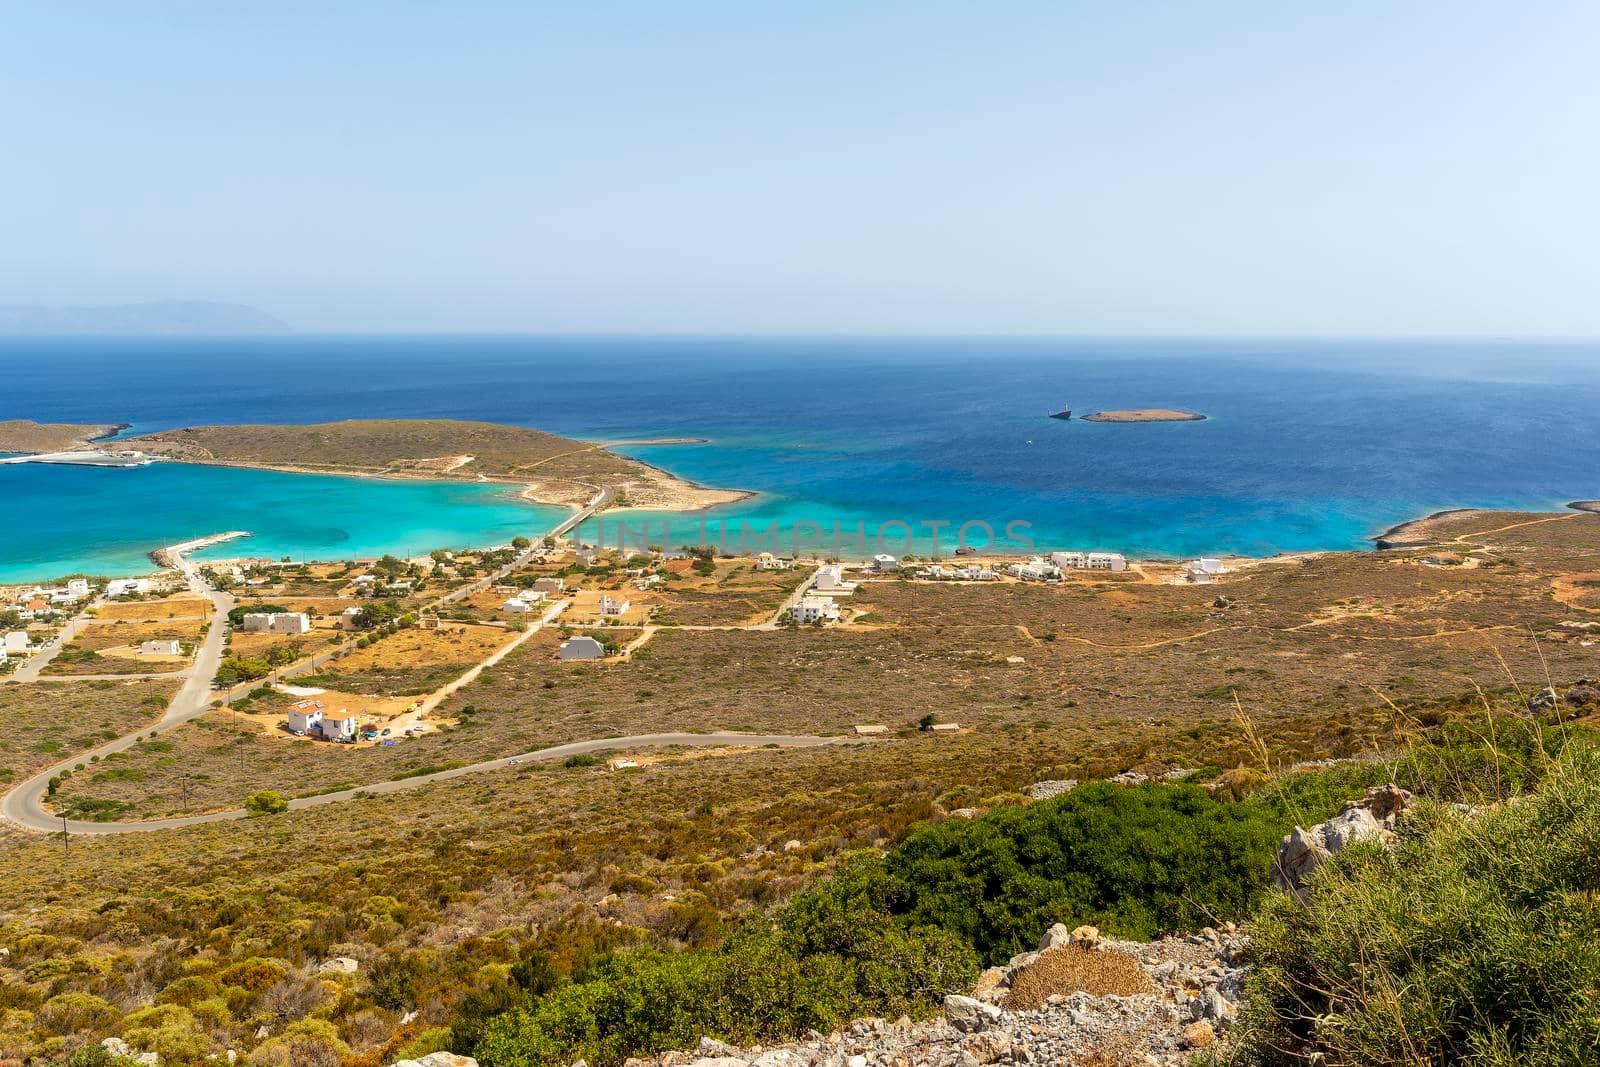 Diakofti port at the Greek island of Kythira. The shipwreck of the Russian boat Norland in a distance. by ankarb